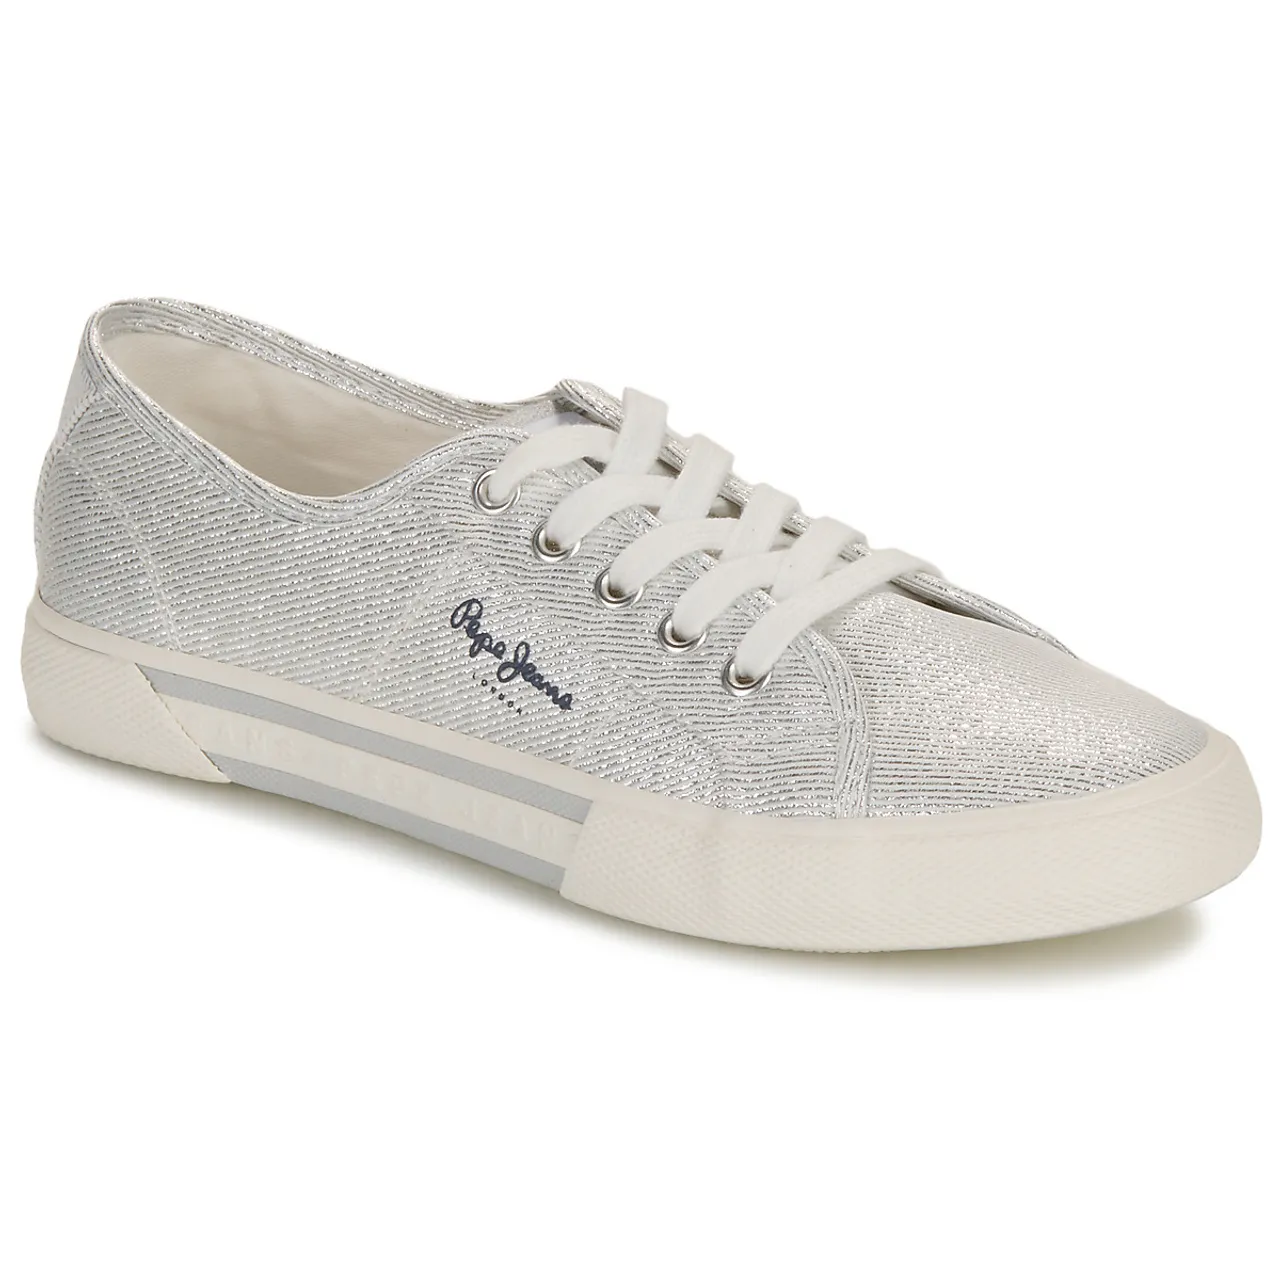 Pepe jeans  BRADY PARTY W  women's Shoes (Trainers) in Silver